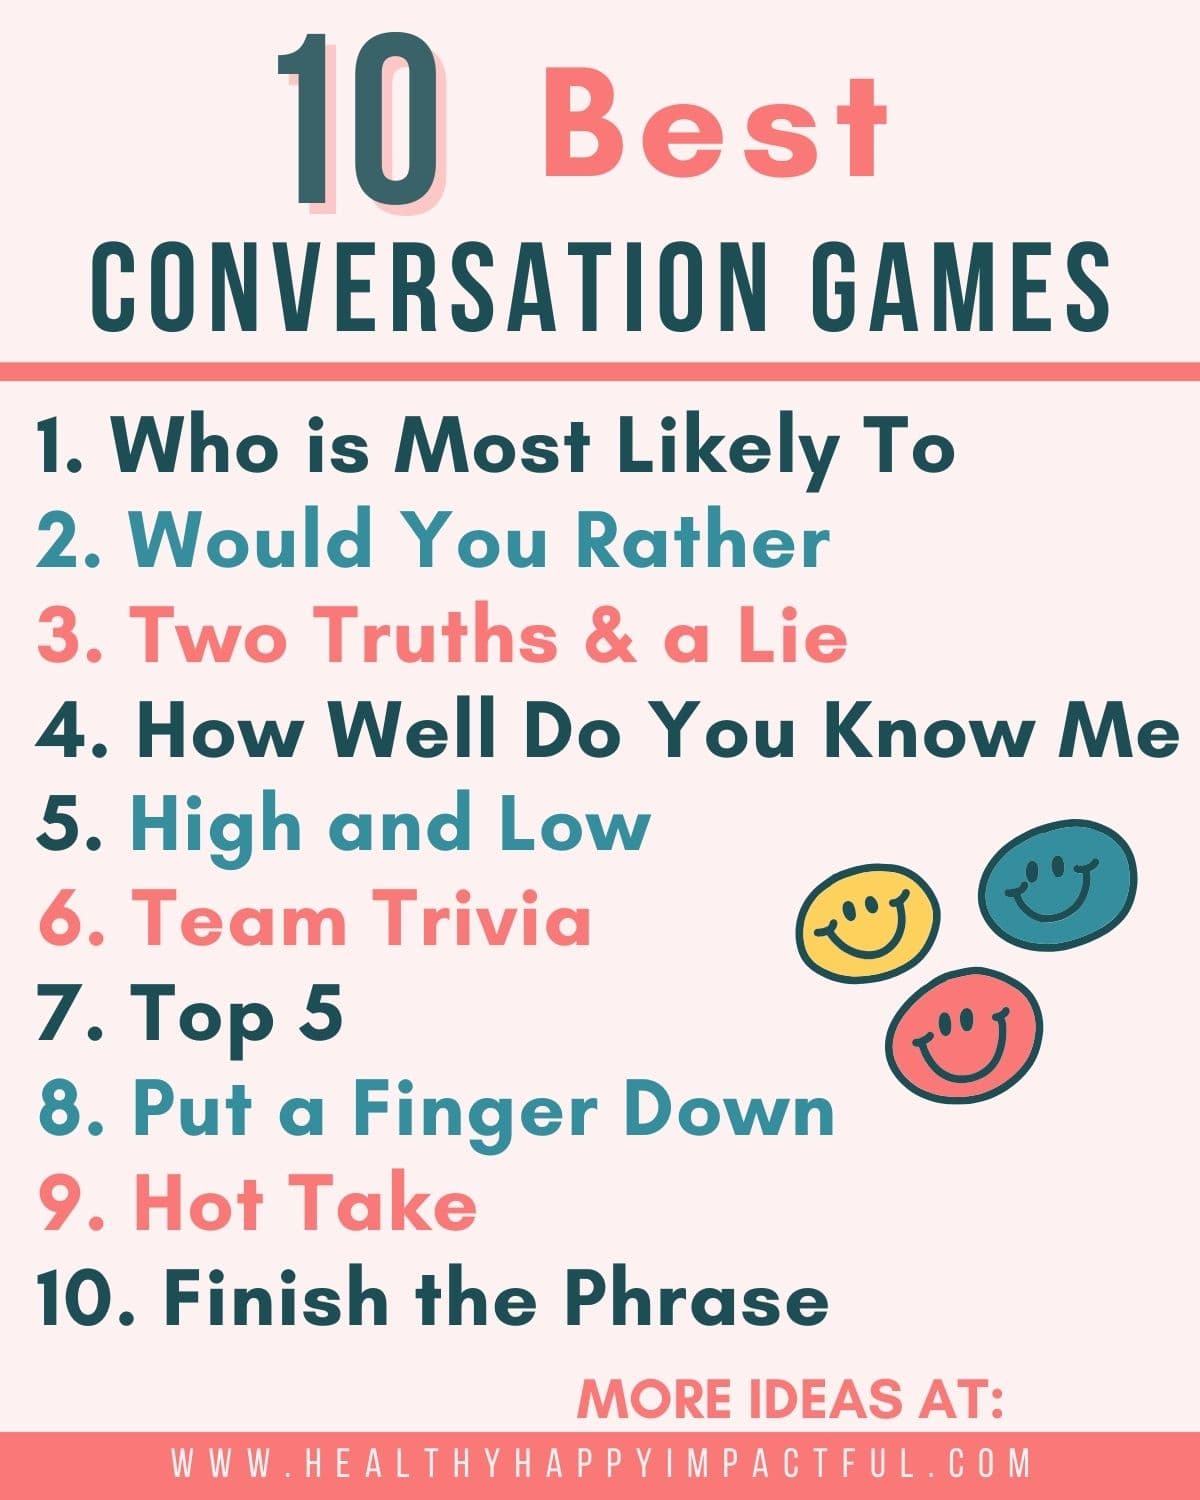 Fun conversation talking games to play with family and friends, goals examples and ideas